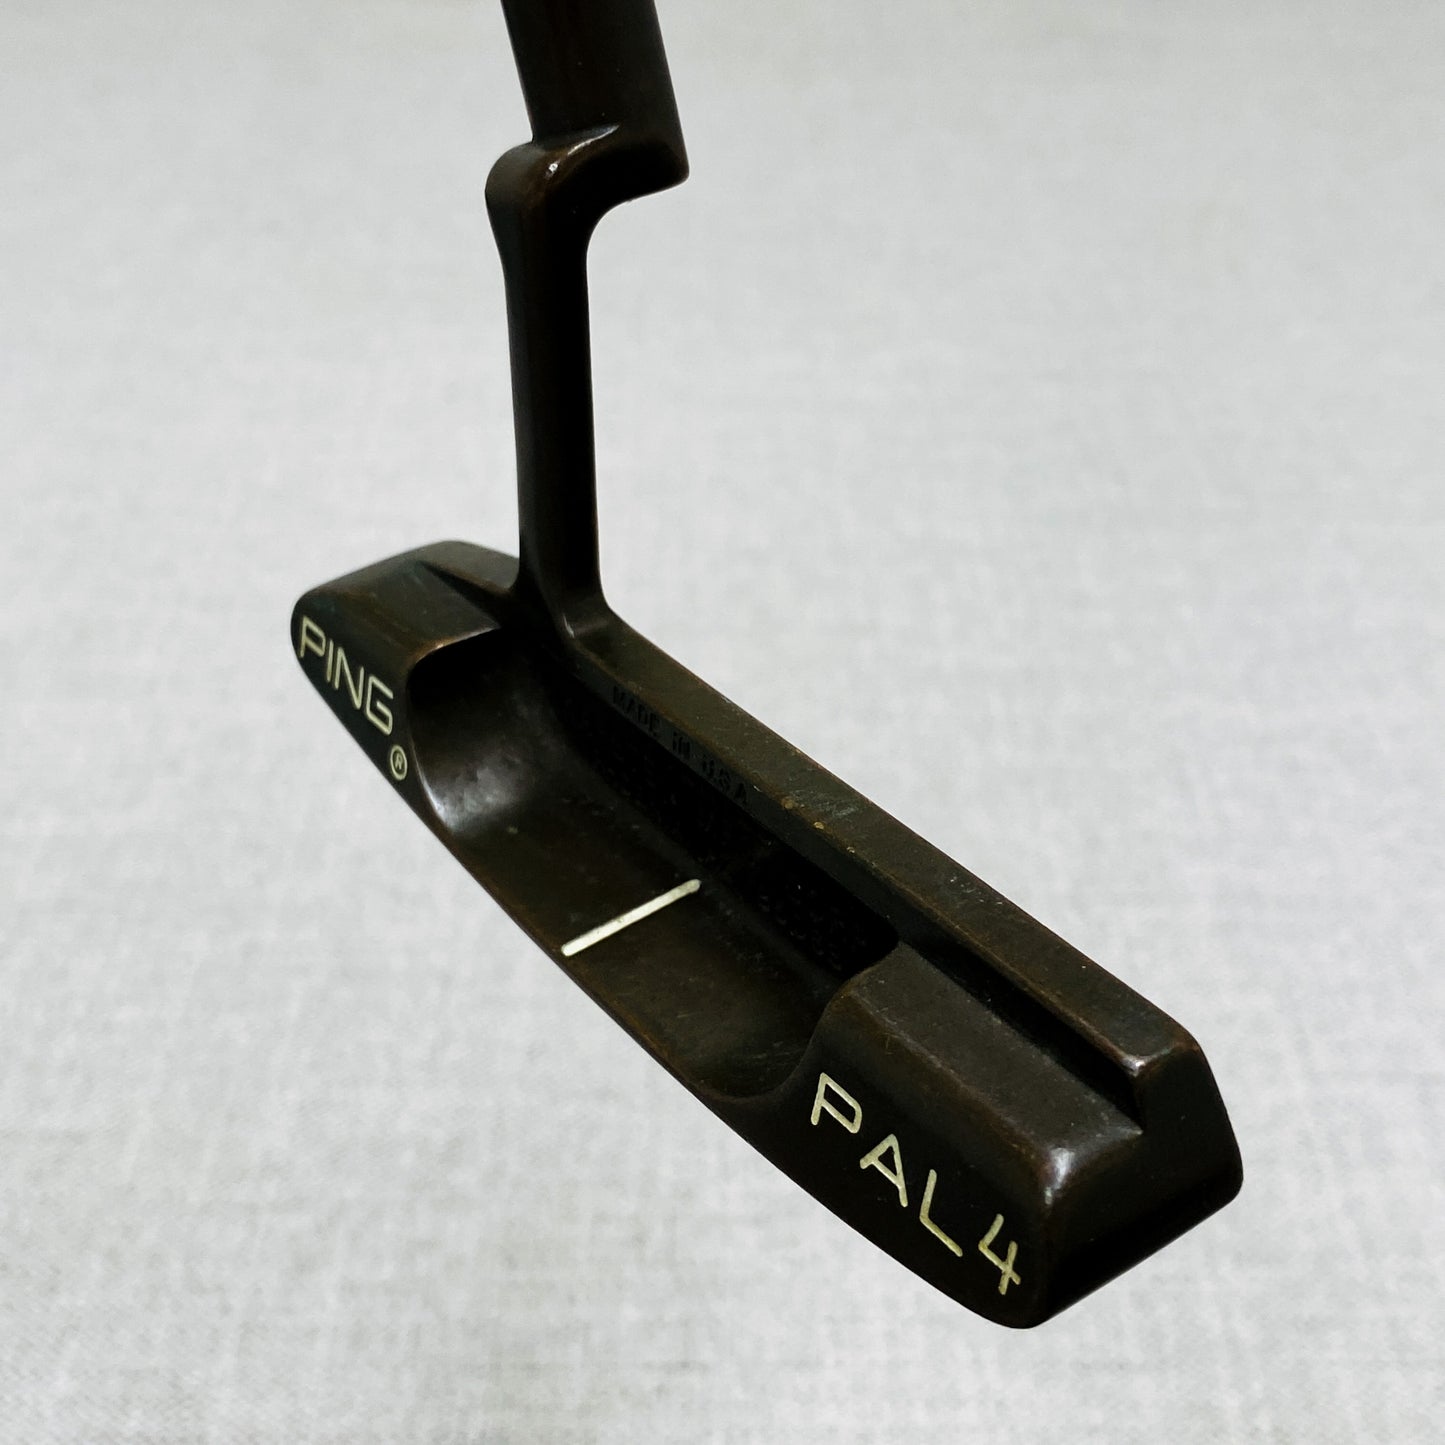 PING Pal 4 Beryllium Copper Putter. 35 inch - Very Good Condition # T994